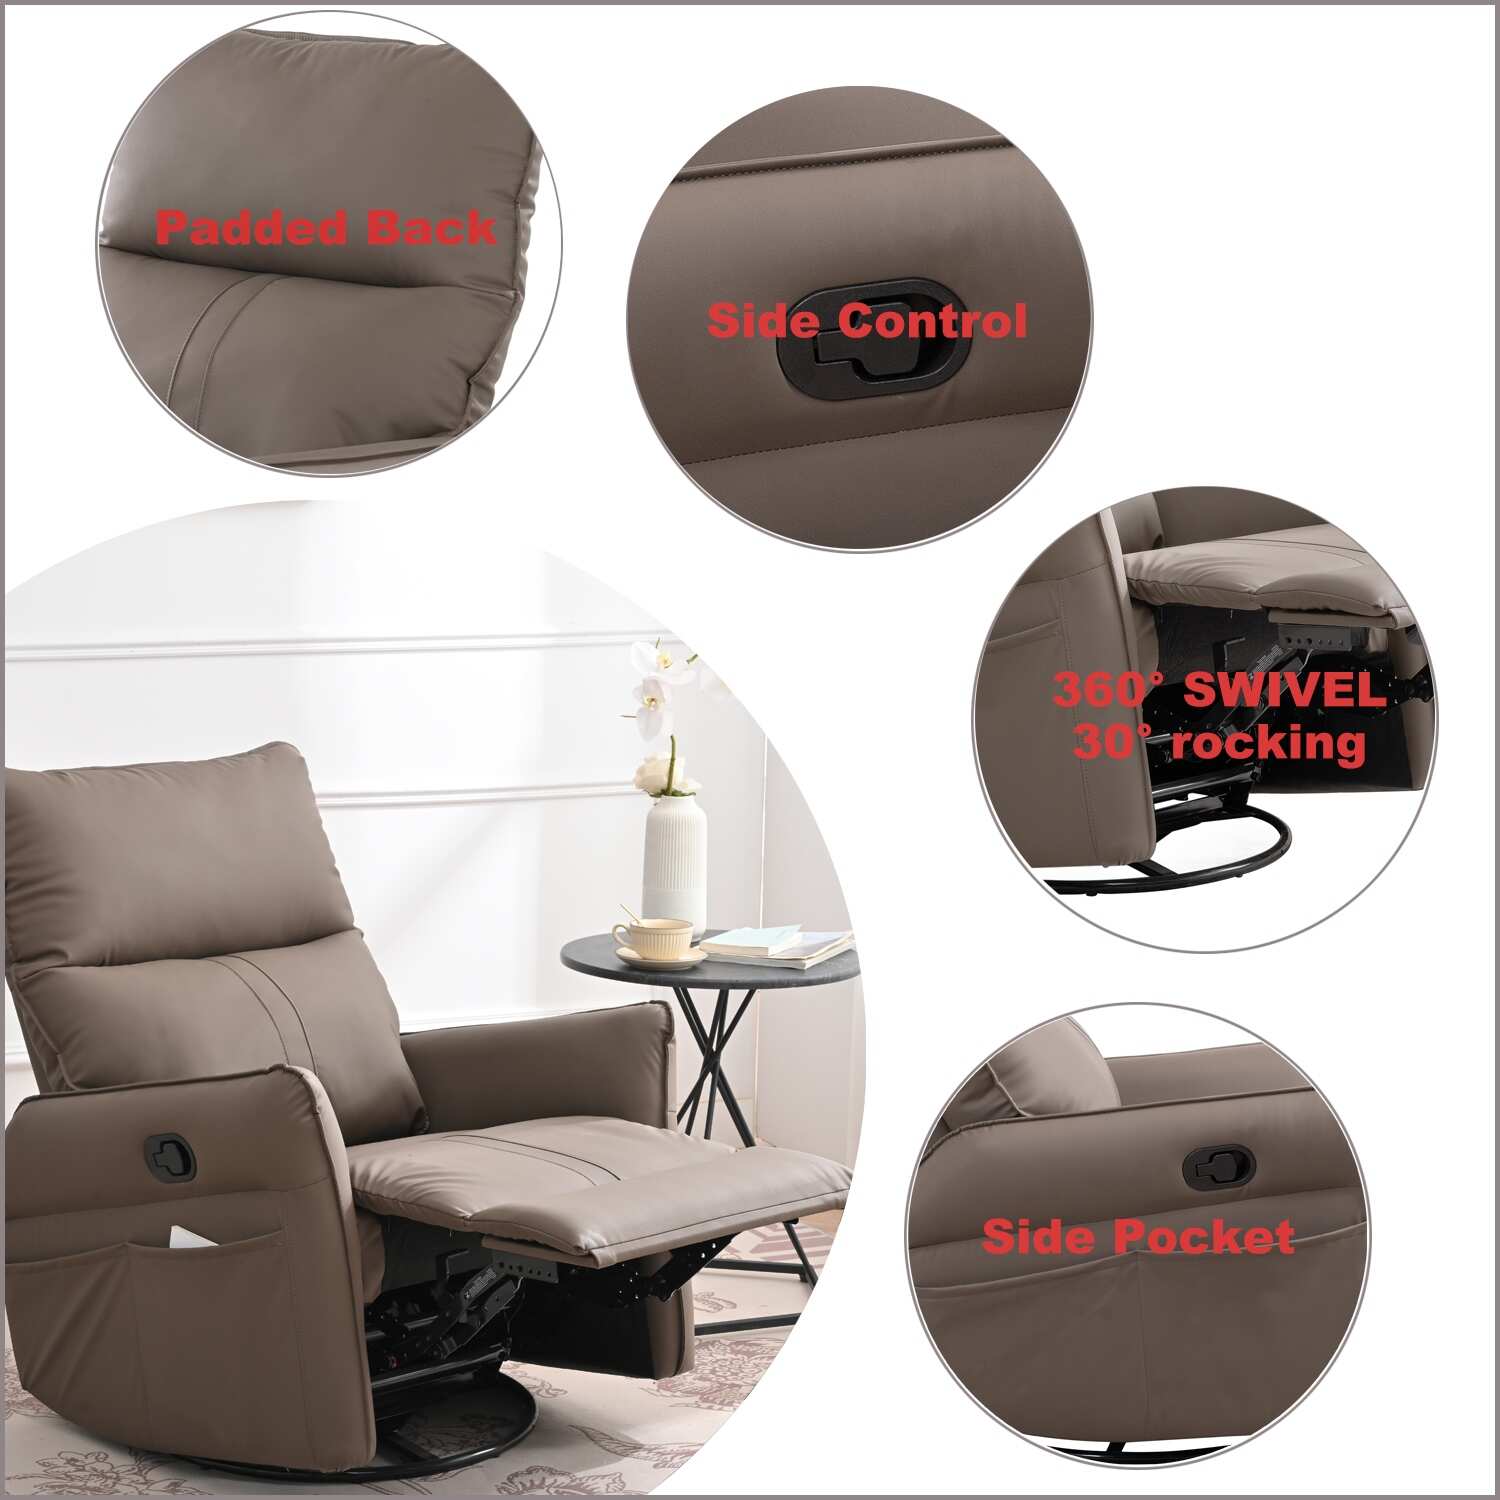 Modern Small Rocking Swivel Recliner Chair for Bedroom,Living Room Chair Home Theater Seat,Side Pocket